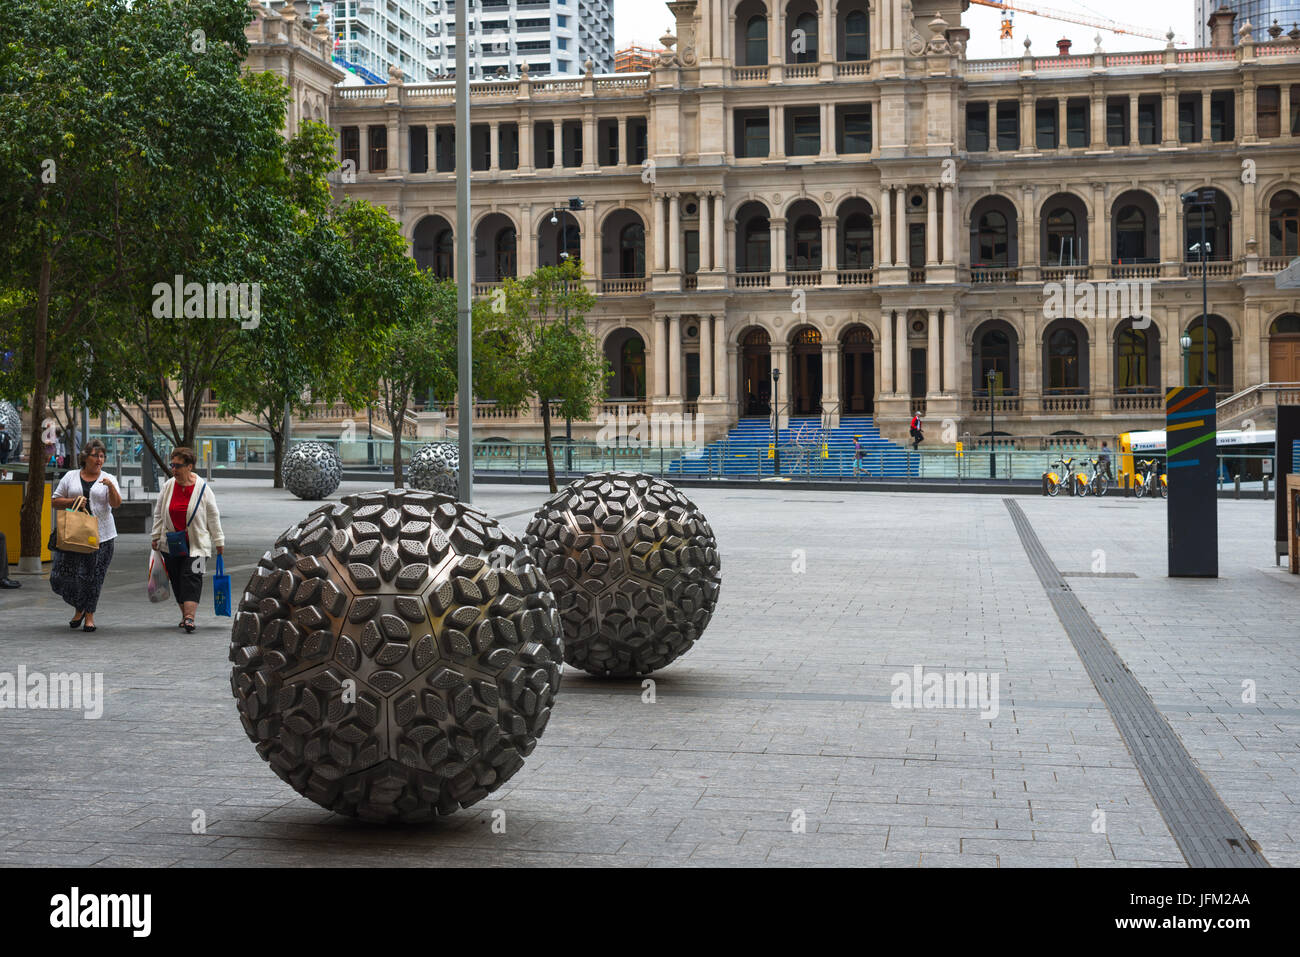 At the top of the Mall, in front of the Casino are 15 Spheres of Steam, a sculpture by Donna Marcus, made from 7,000 steamers! Brisbane, Australia. Stock Photo